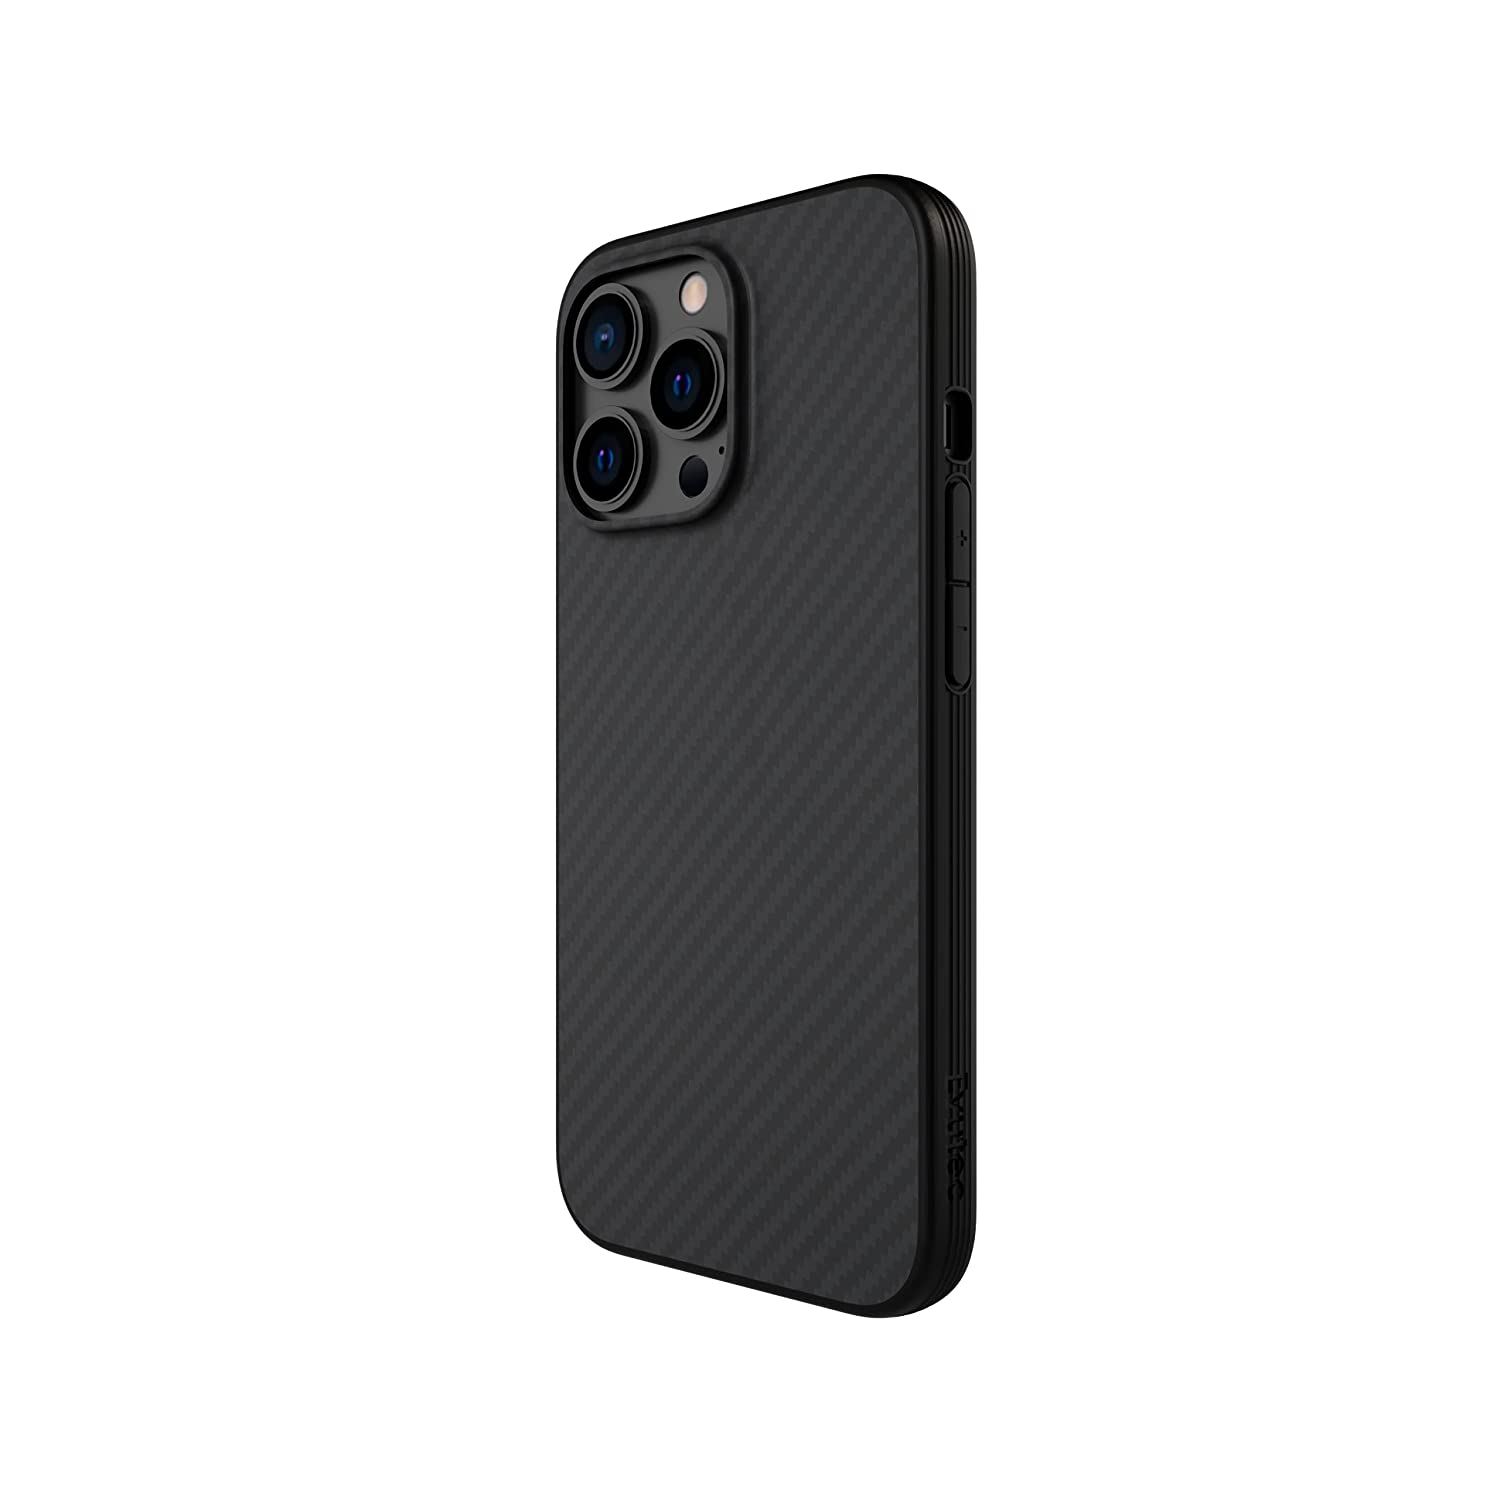 Evutec Compatible with iPhone 13 Pro Case, Aramid Fiber iPhone 13 Pro Cases Cover for iPhone 13 Pro, Unique Hard & Smooth Phone Case with AFIX+ Free Vent Mount